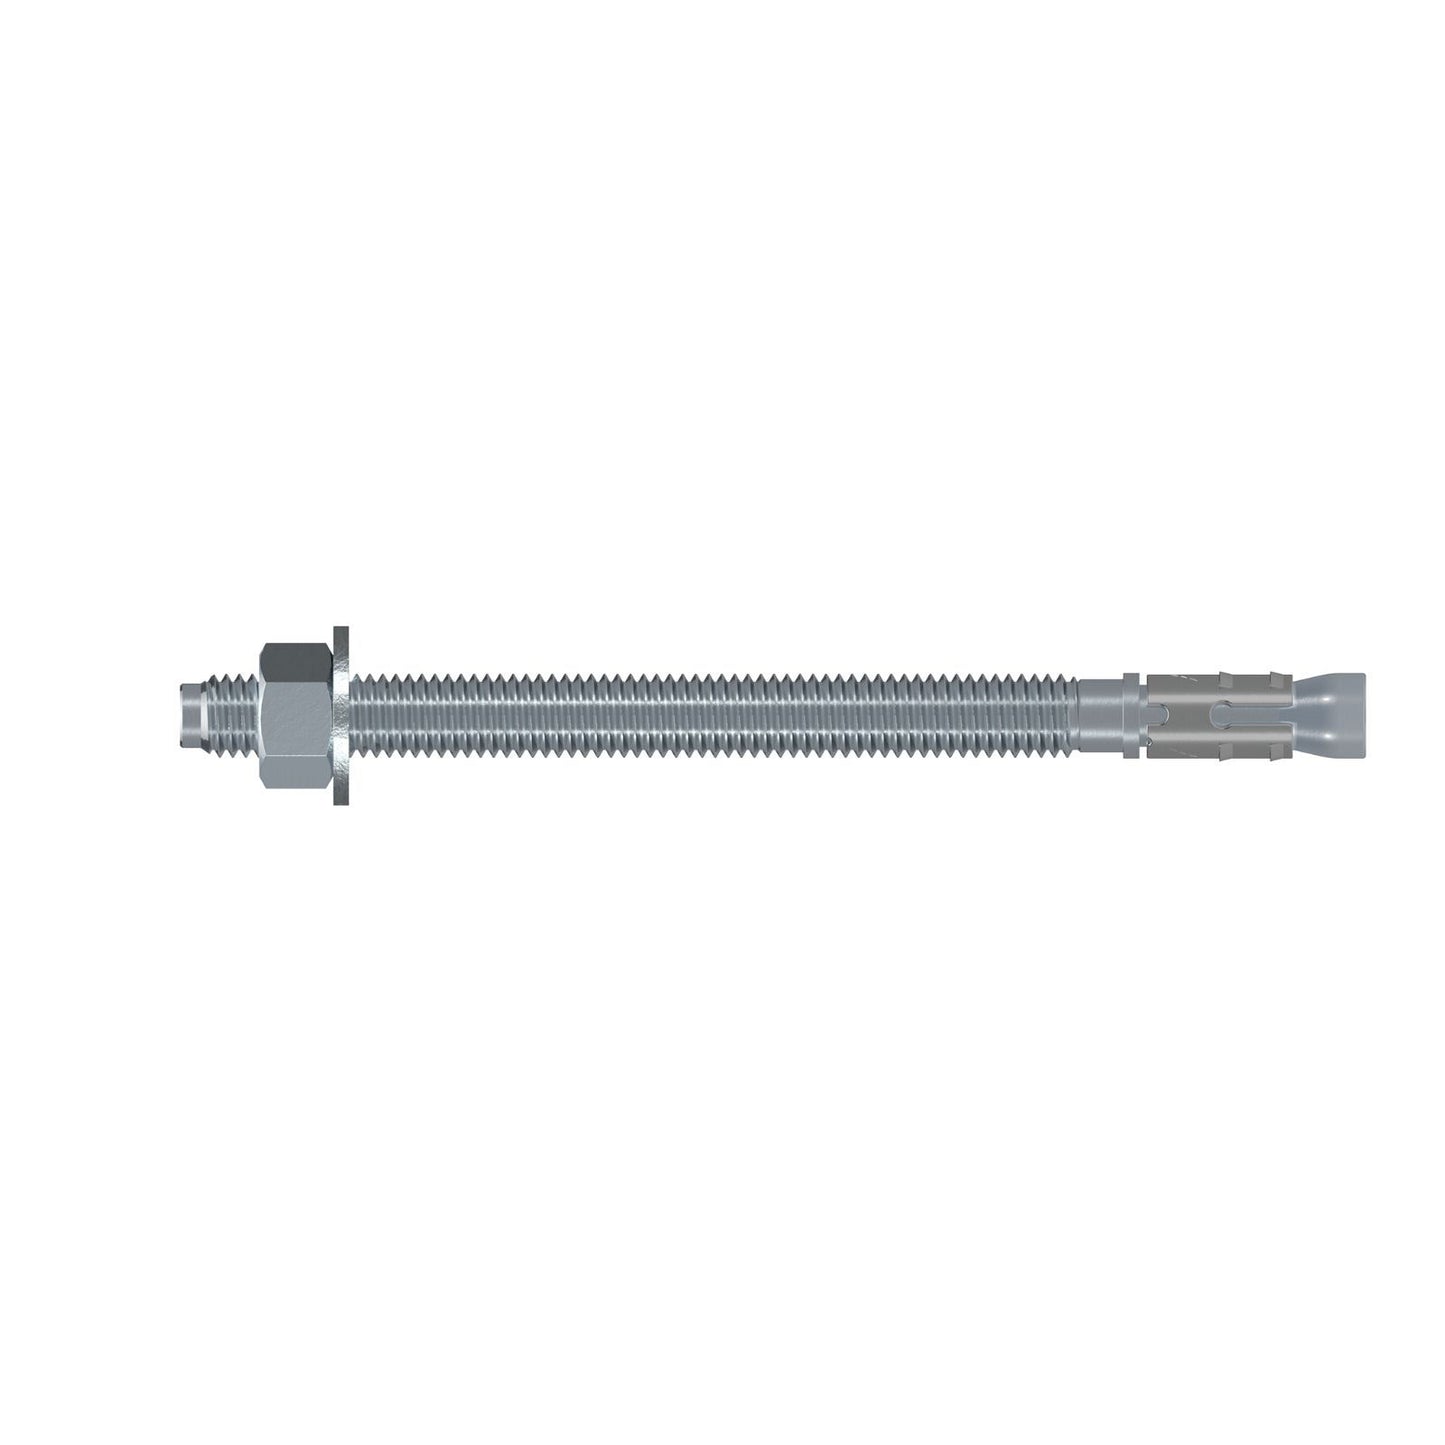 1/2" x 7" Simpson Strong Bolt 2 Wedge Anchor, Stainless Steel